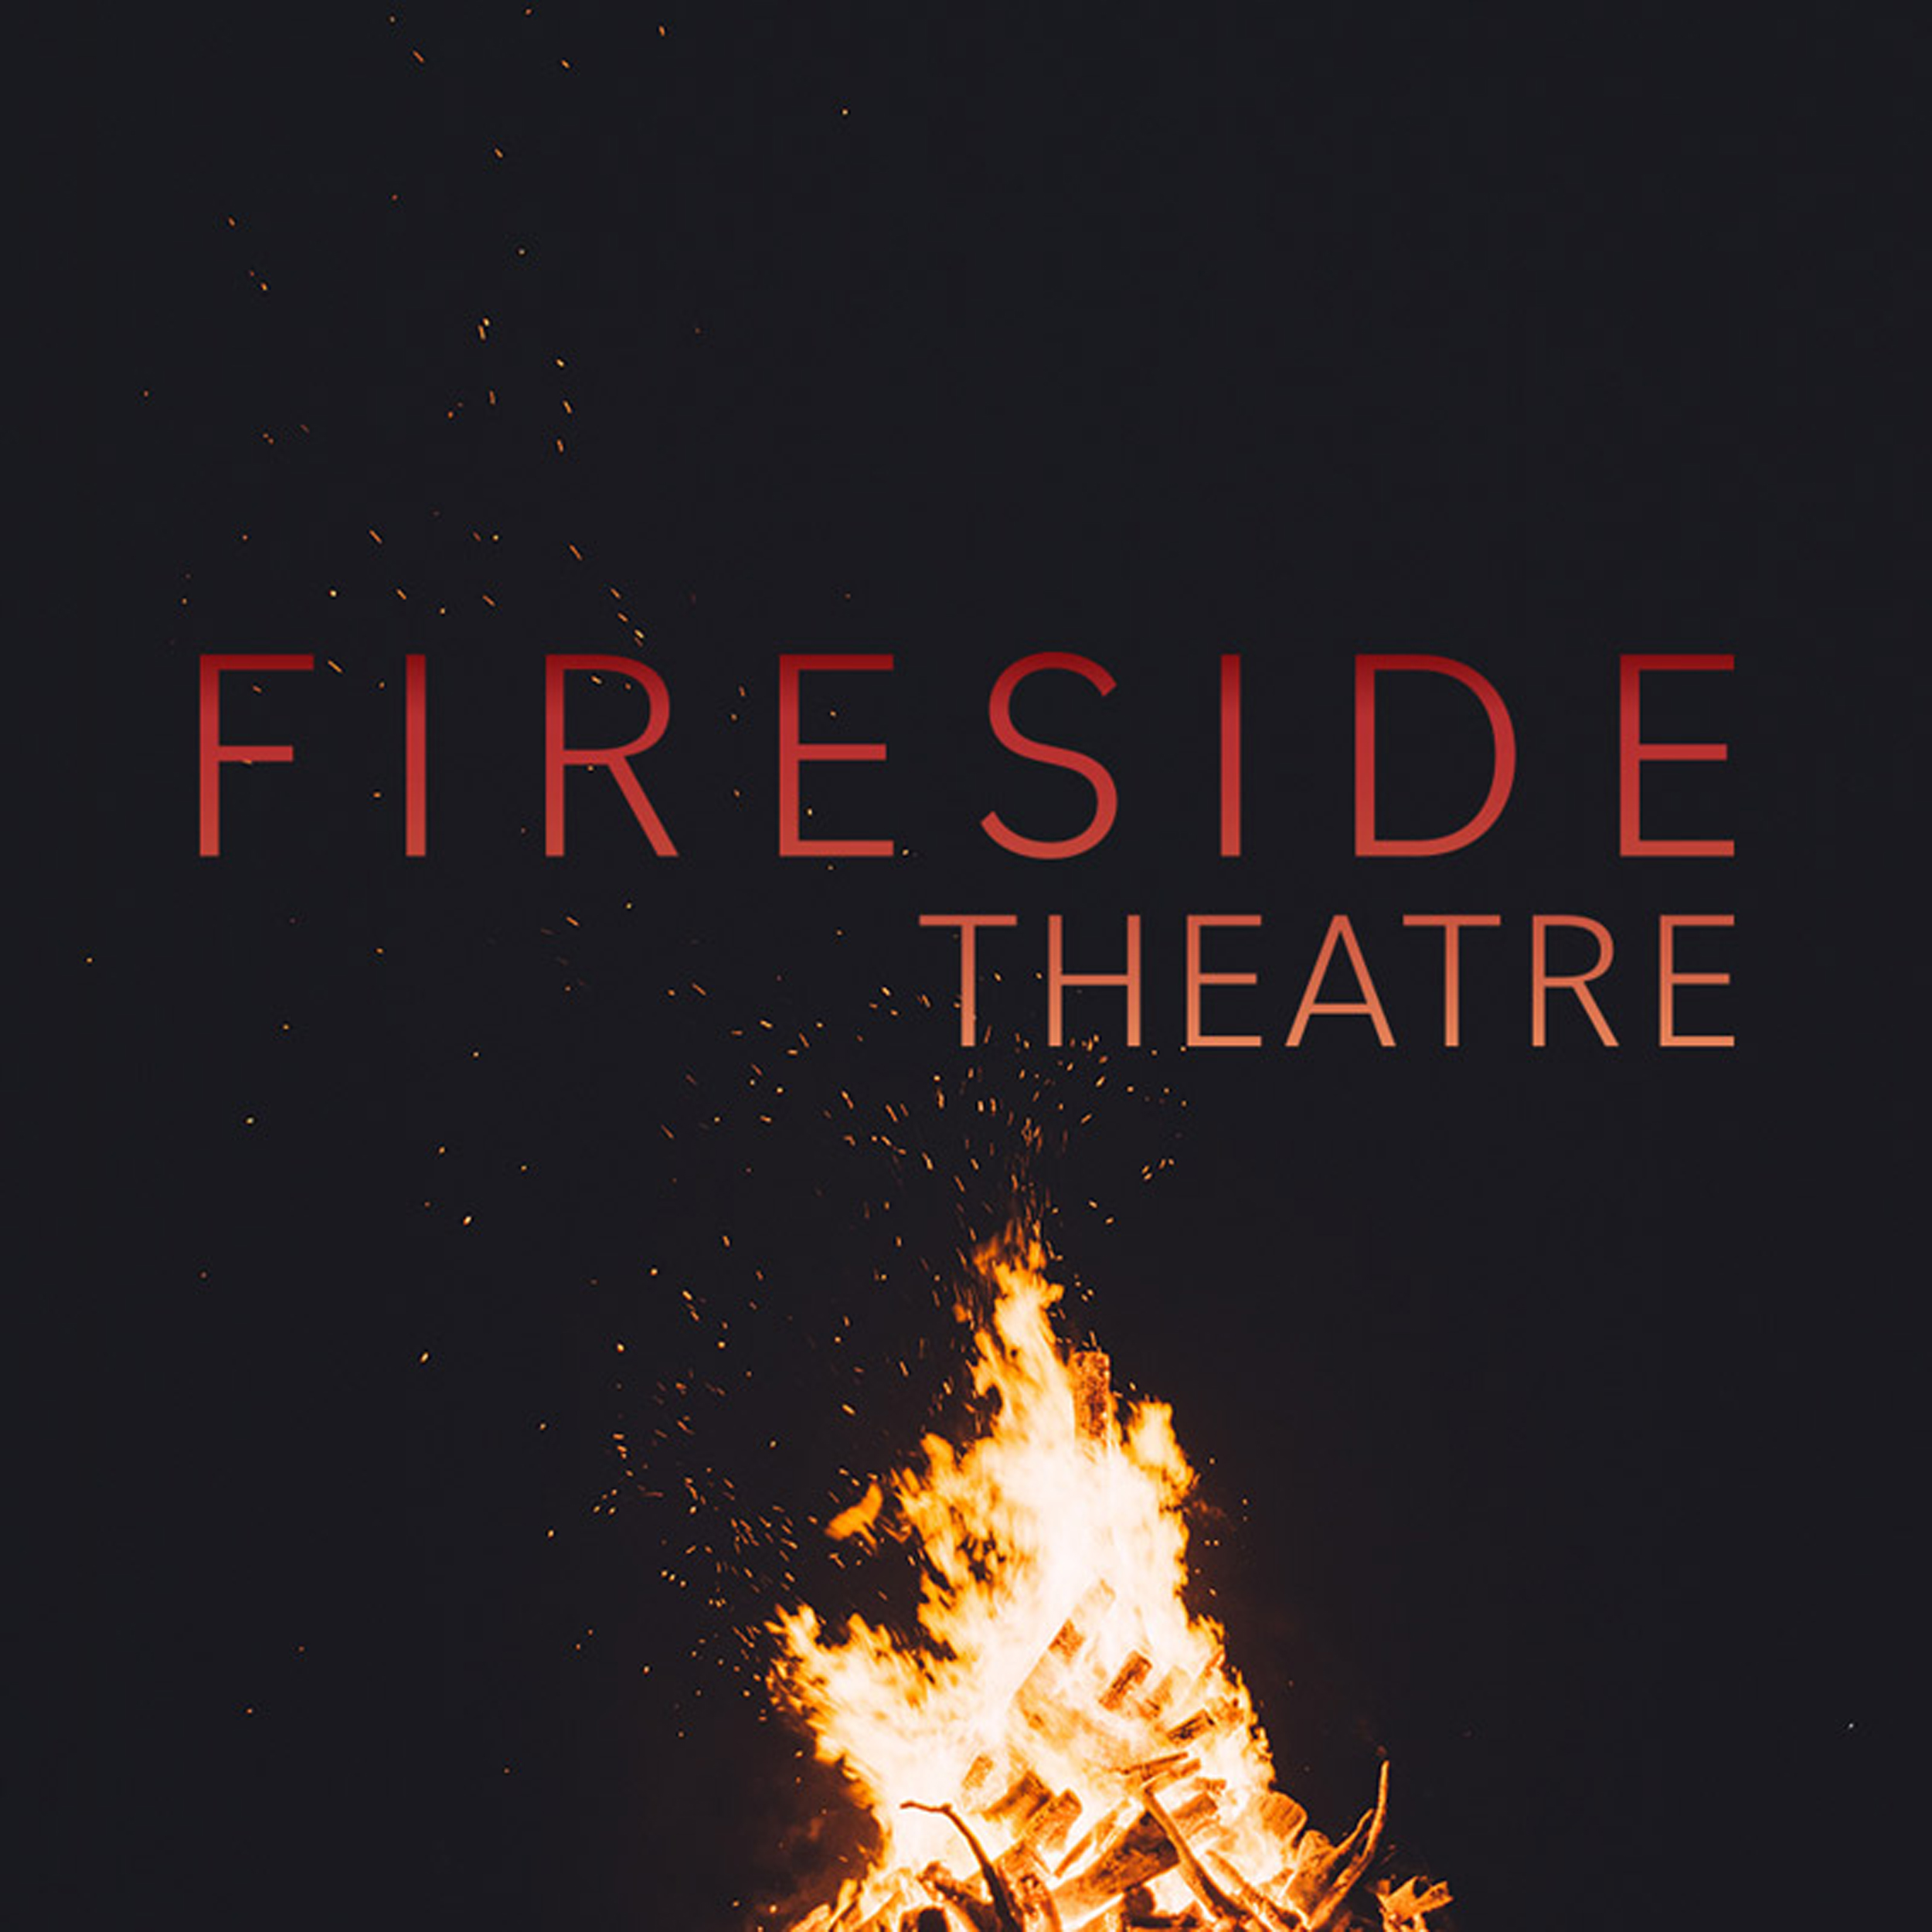 chloe v designs, fireside theatre logo, the logo is on a night sky with a bonfire pictured below it